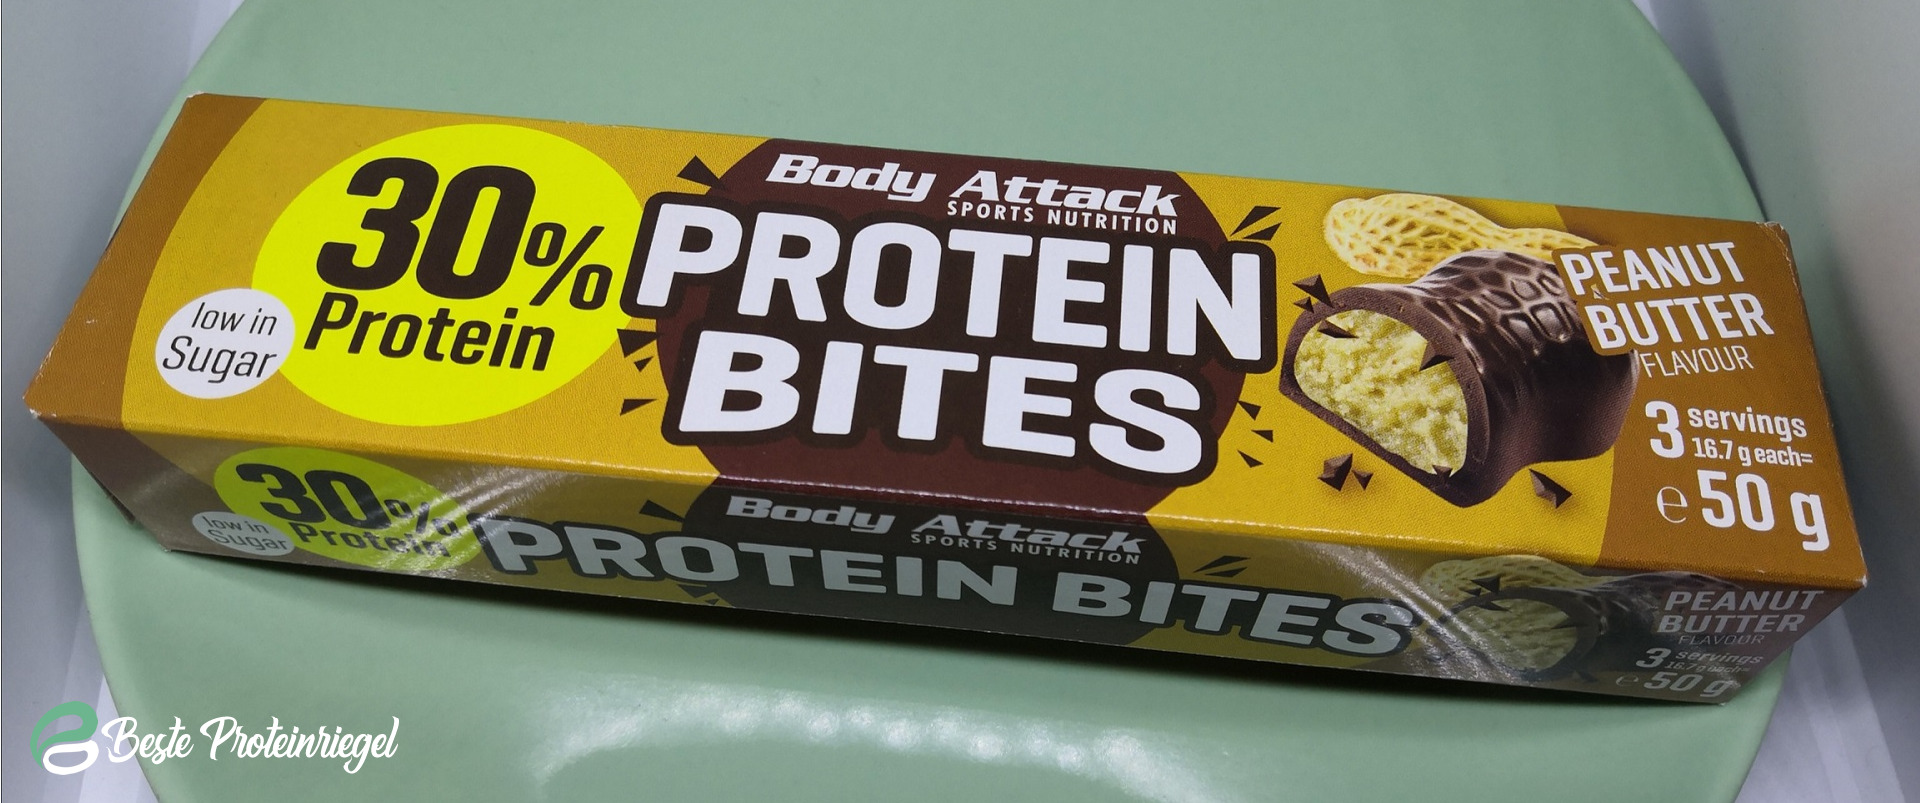 Body Attack Protein Bites Verpackung